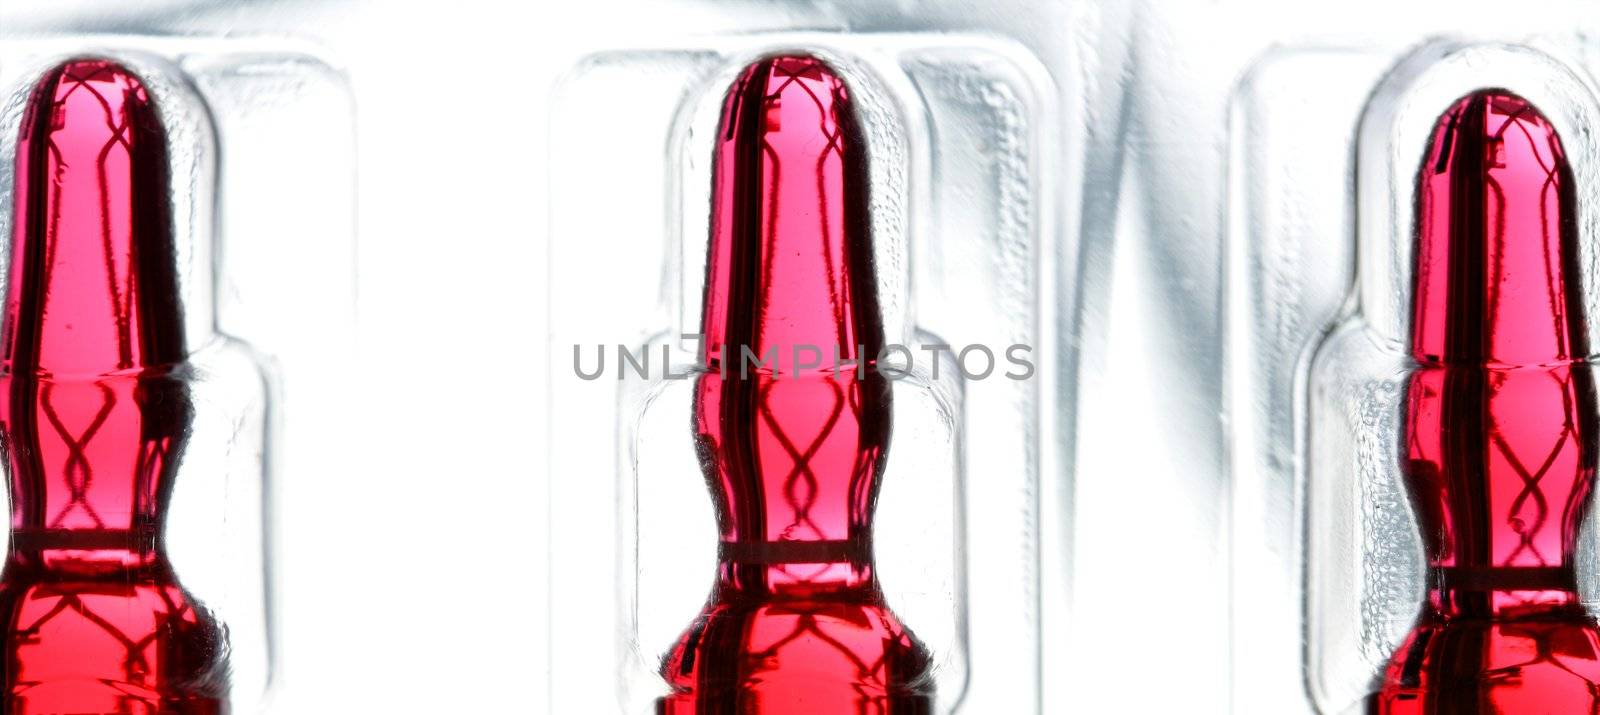 Glass ampoule with red liquid medicine inside